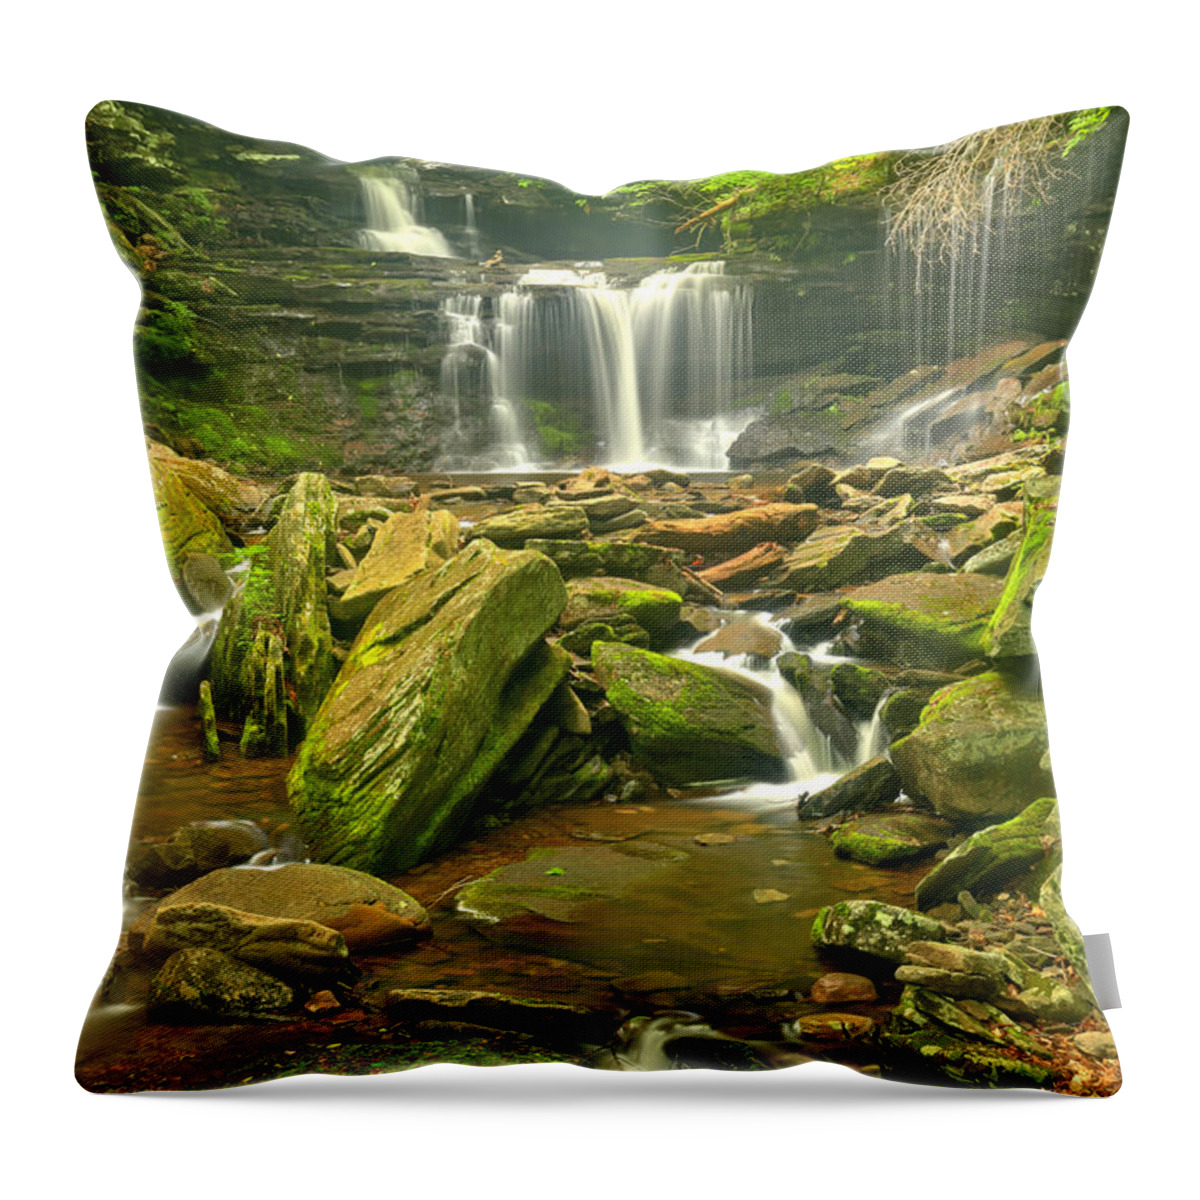 Ricketts Glen Throw Pillow featuring the photograph Ricketts Glen Streaming Waterfalls by Adam Jewell